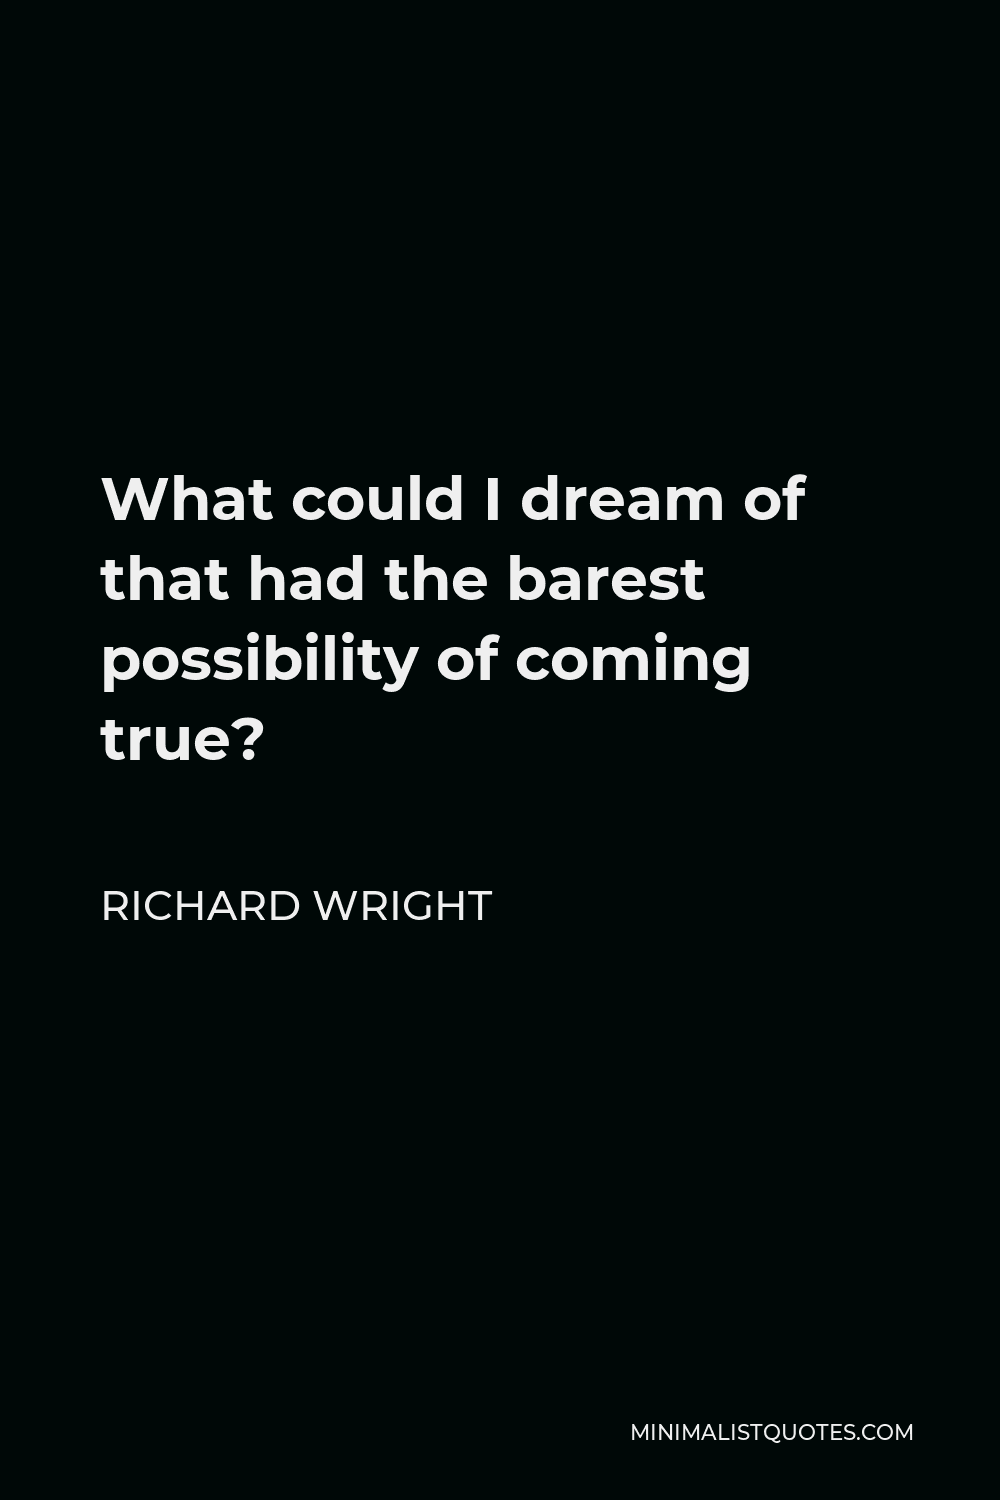 Richard Wright Quote - What could I dream of that had the barest possibility of coming true?